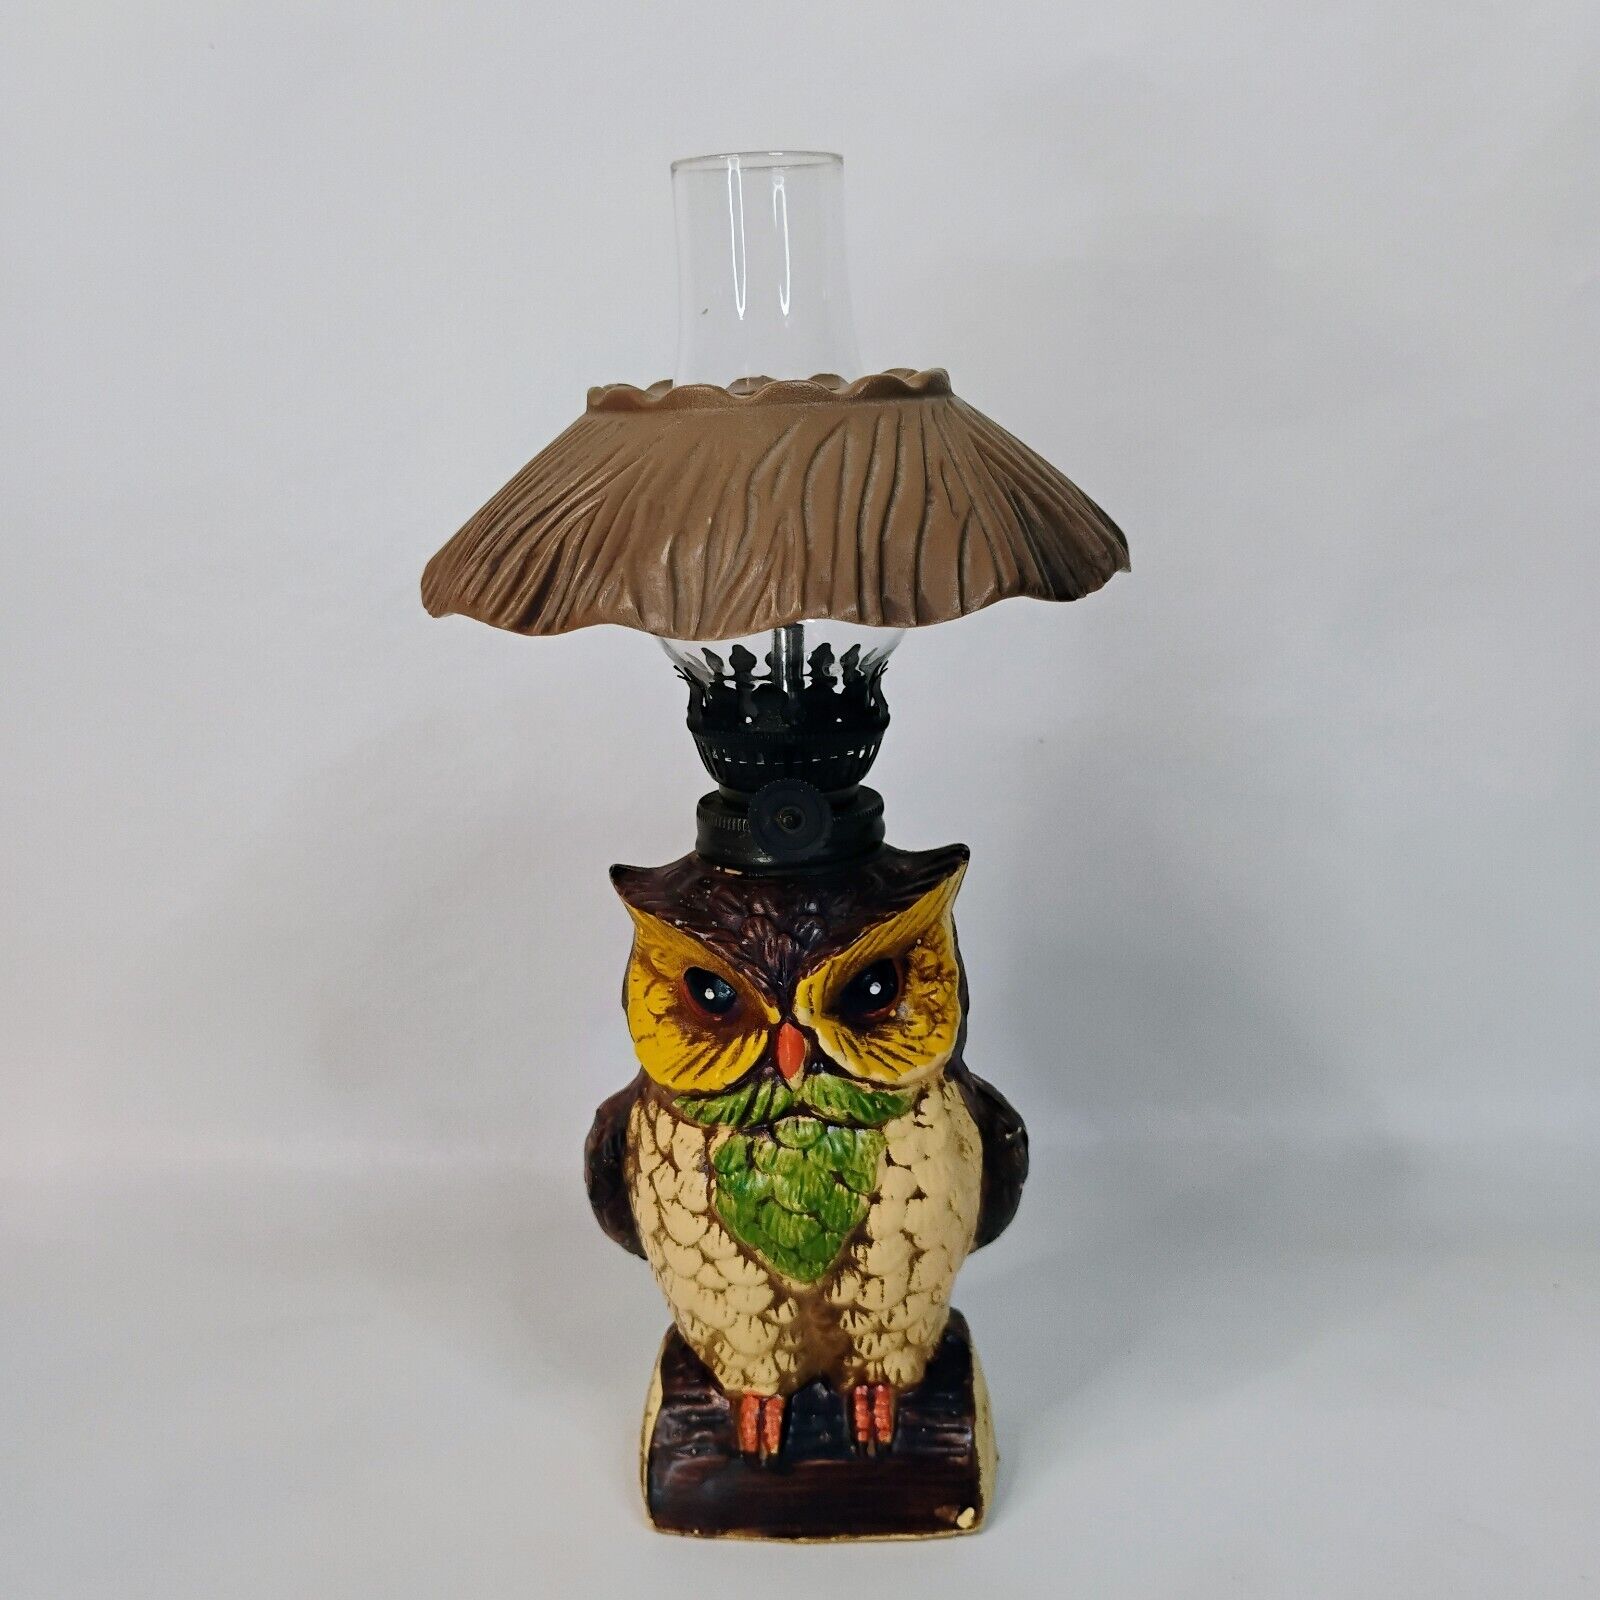 Vintage Owl Shaped Hand Painted Mini Oil Lamp with Shade /Japan/ Owl Decor